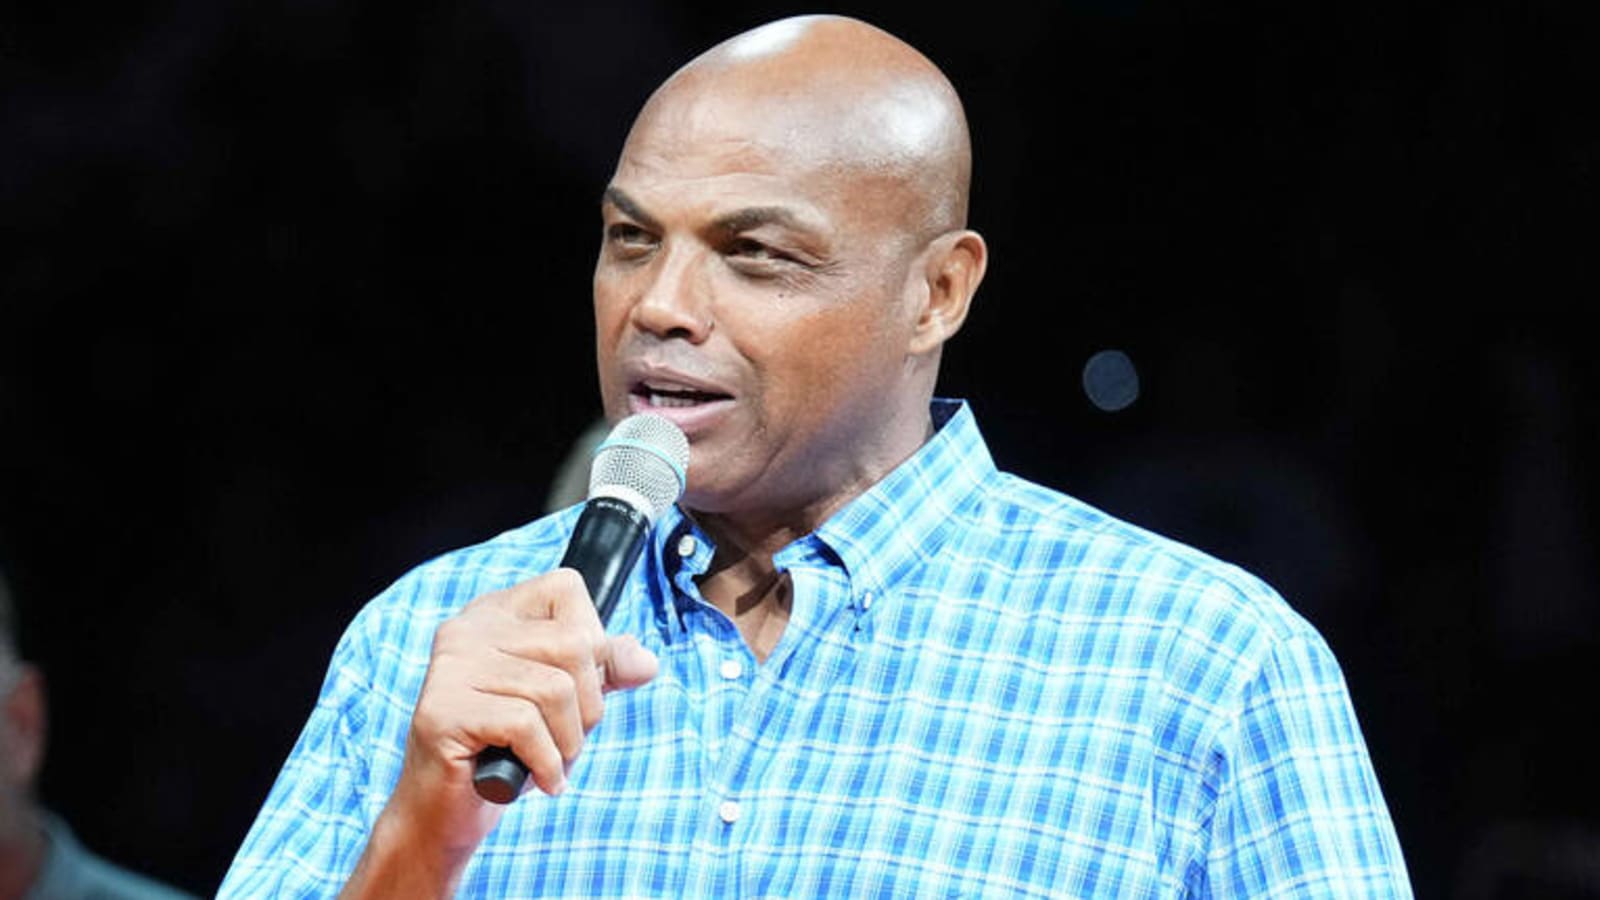 Charles Barkley worryingly reveals ICONIC ‘Shaq, Kenny, Ernie, and Chuck’ band could break up